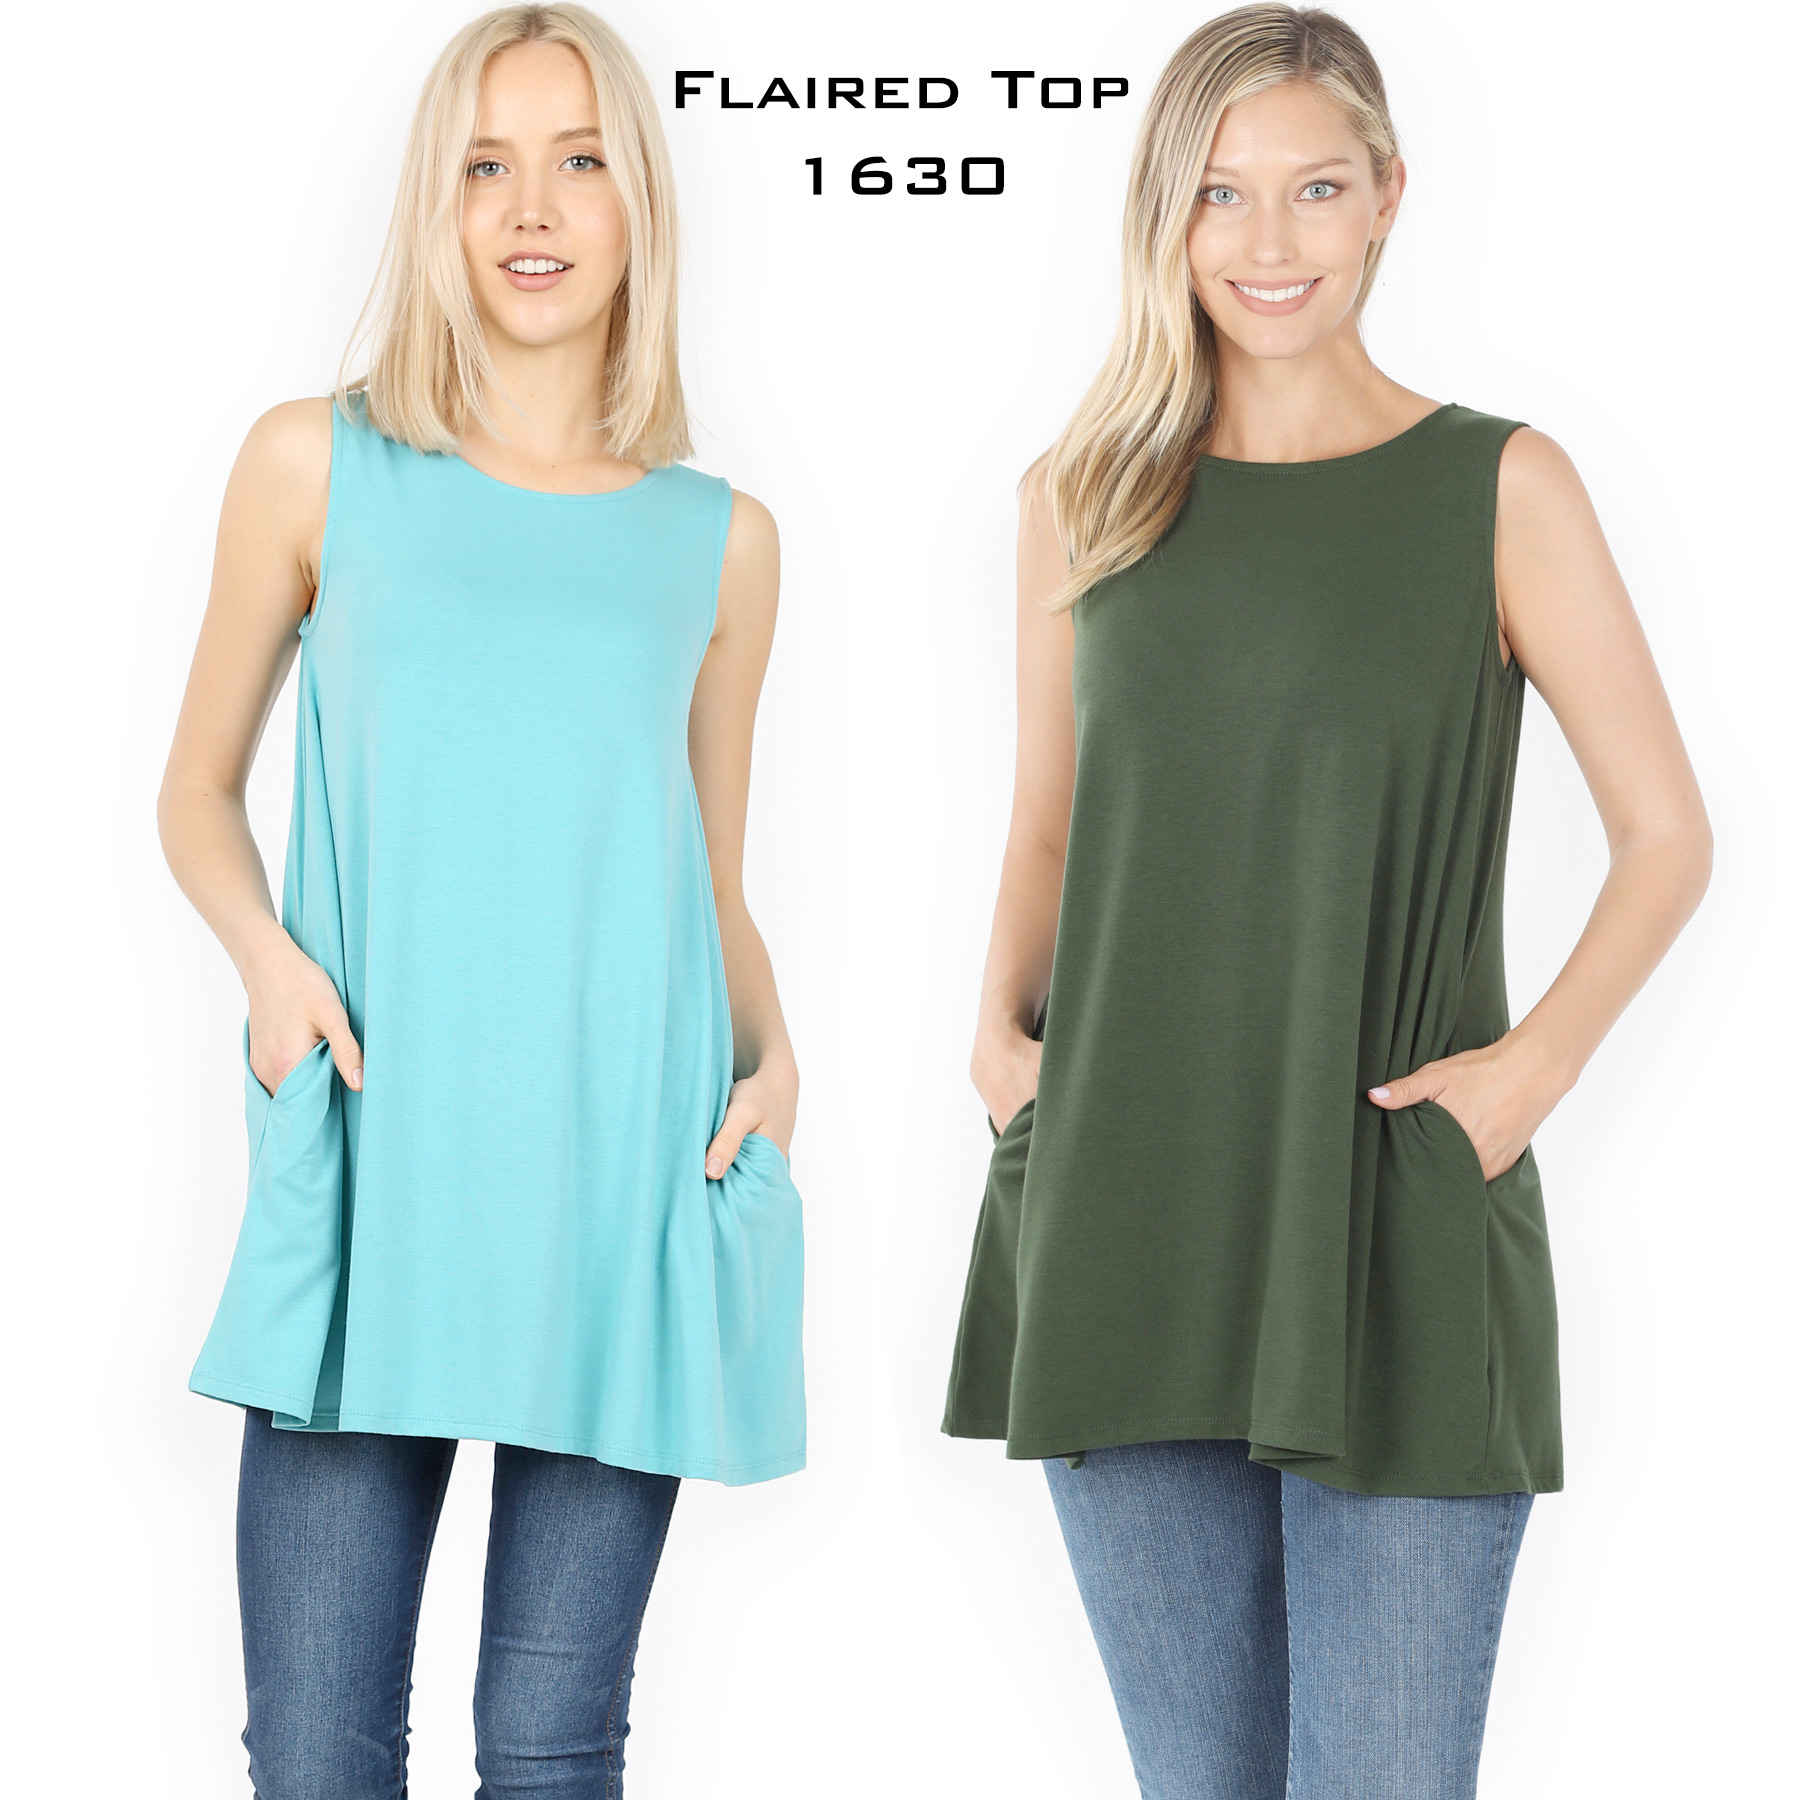 1630 - Sleeveless Flared Top with Pockets